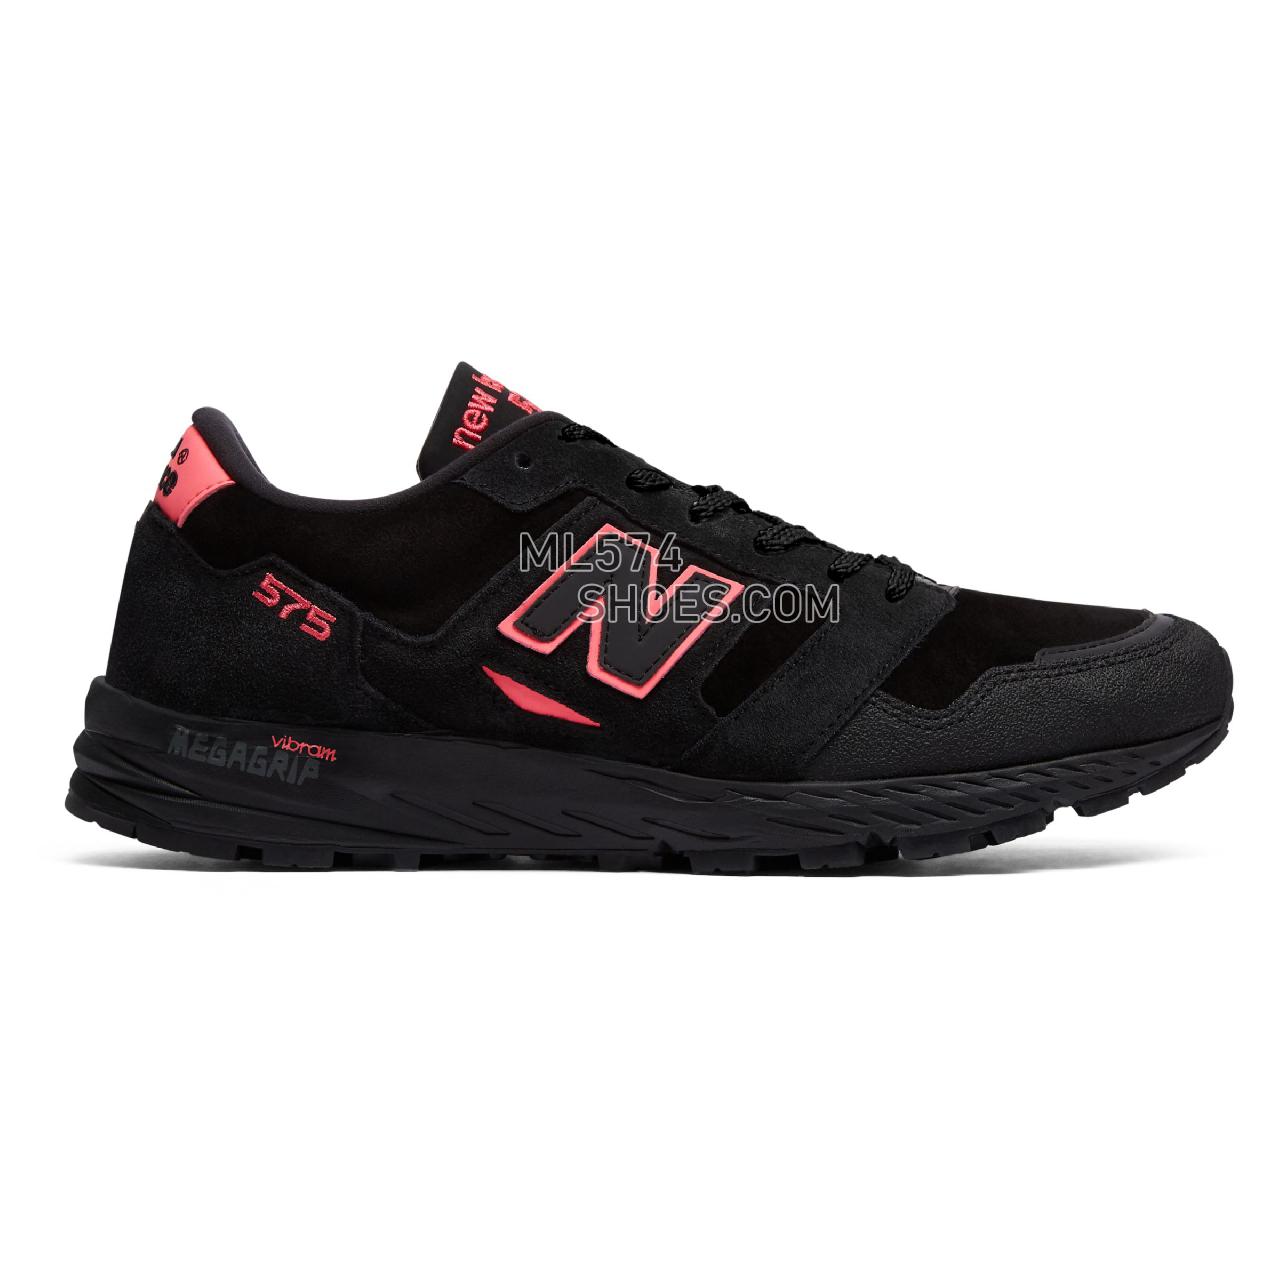 New Balance Made in UK MTL575 - Men's MTL575 Made in UK Classic - Black with Pink - MTL575NE